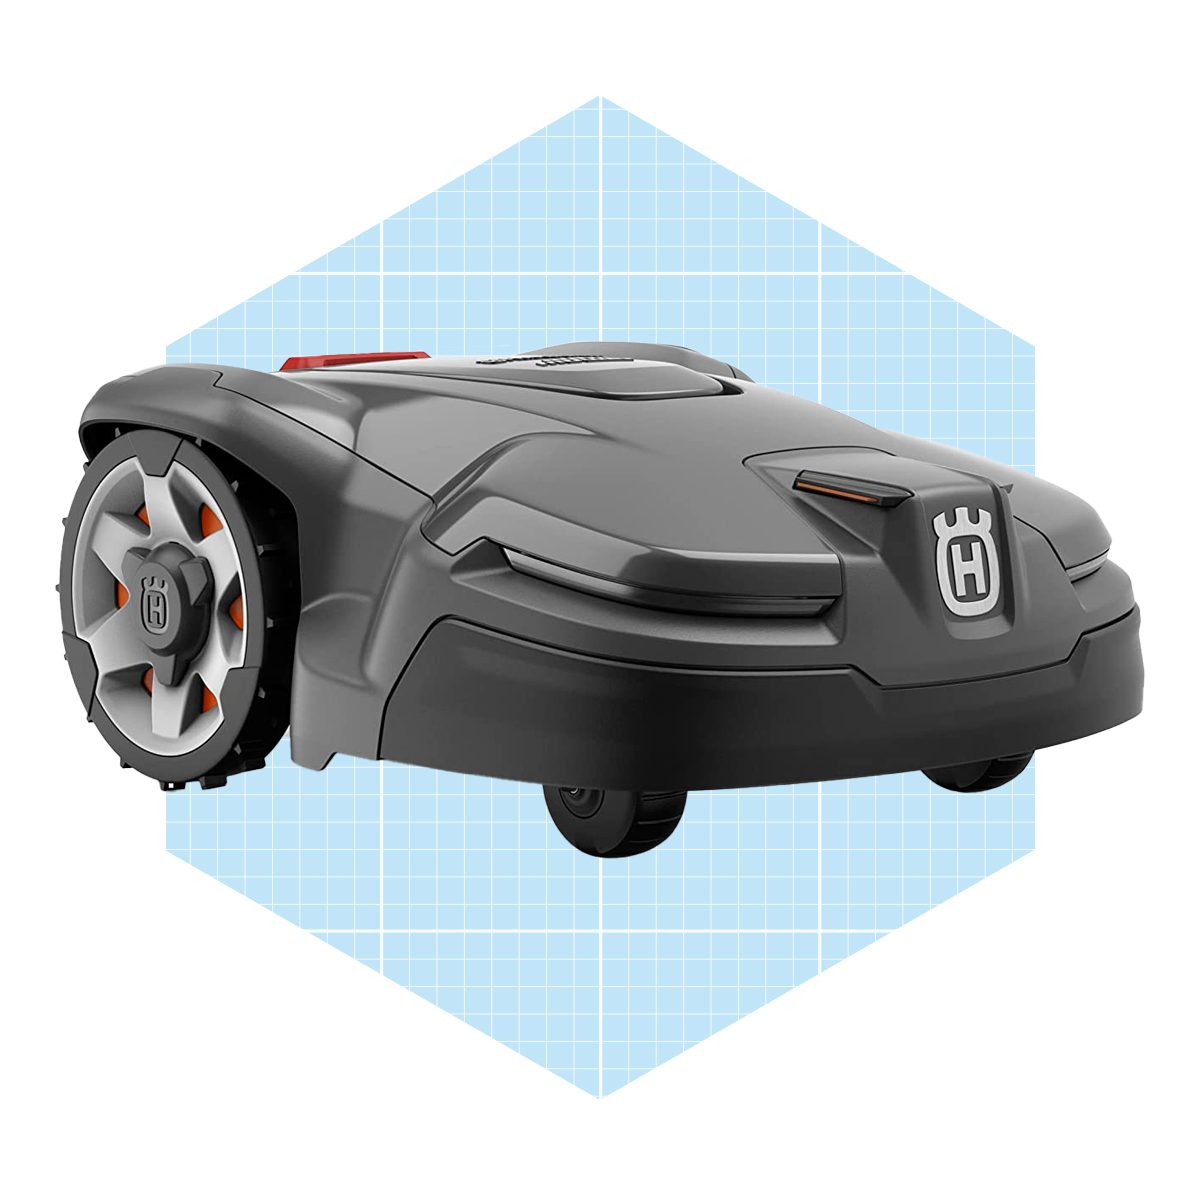 Fhm Ecomm Template Robot Lawn Mower